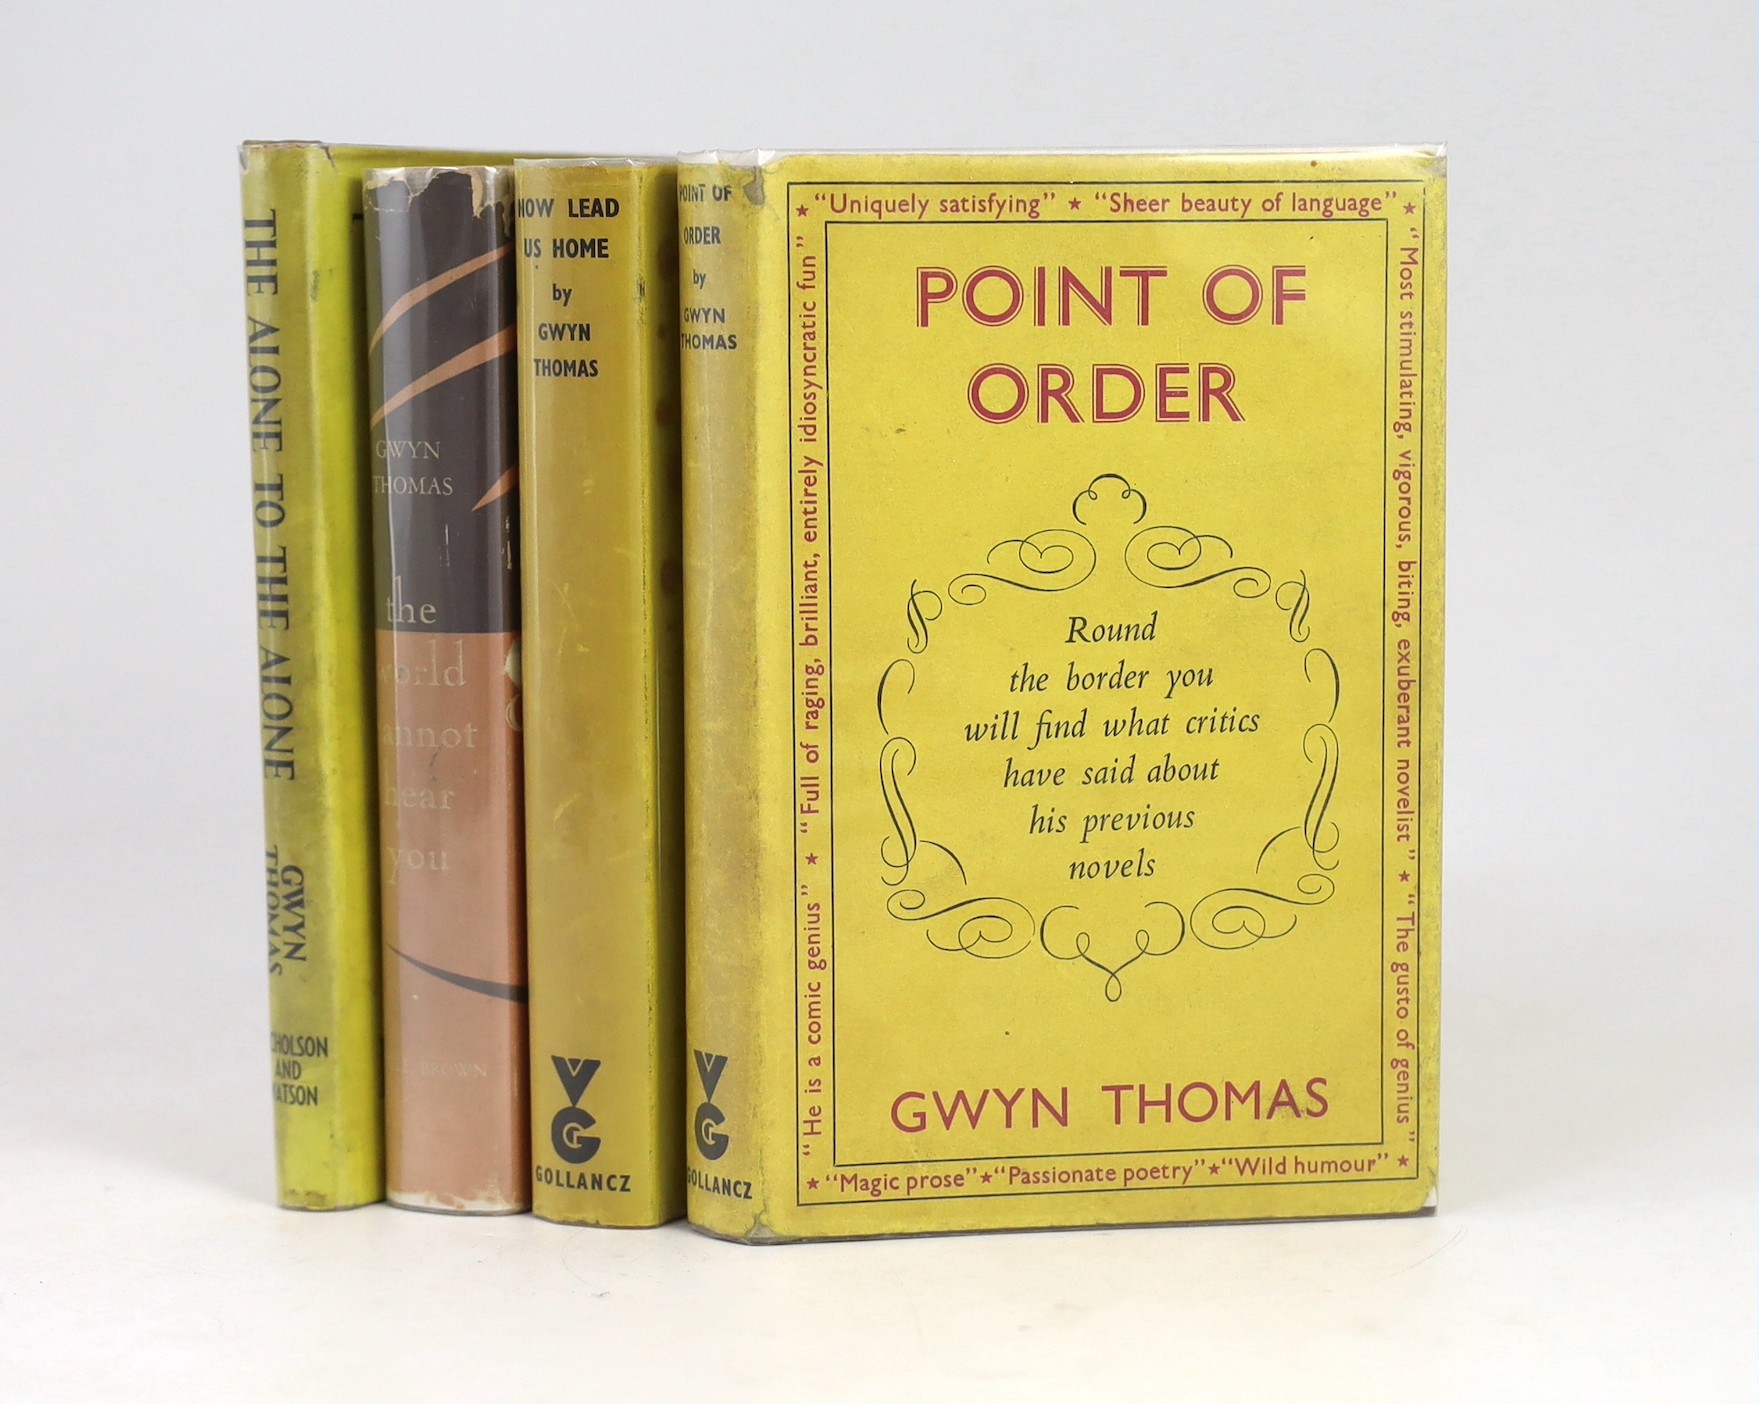 Thomas, Gwyn - 4 works - A Point of Order, 1st edition, 8vo, cloth with unclipped d/j, Victor Gollancz, London, 1956; Now Lead Us Home, publishers advance copy, in unclipped d/j, Victor Gollancz, London, 1952; The World